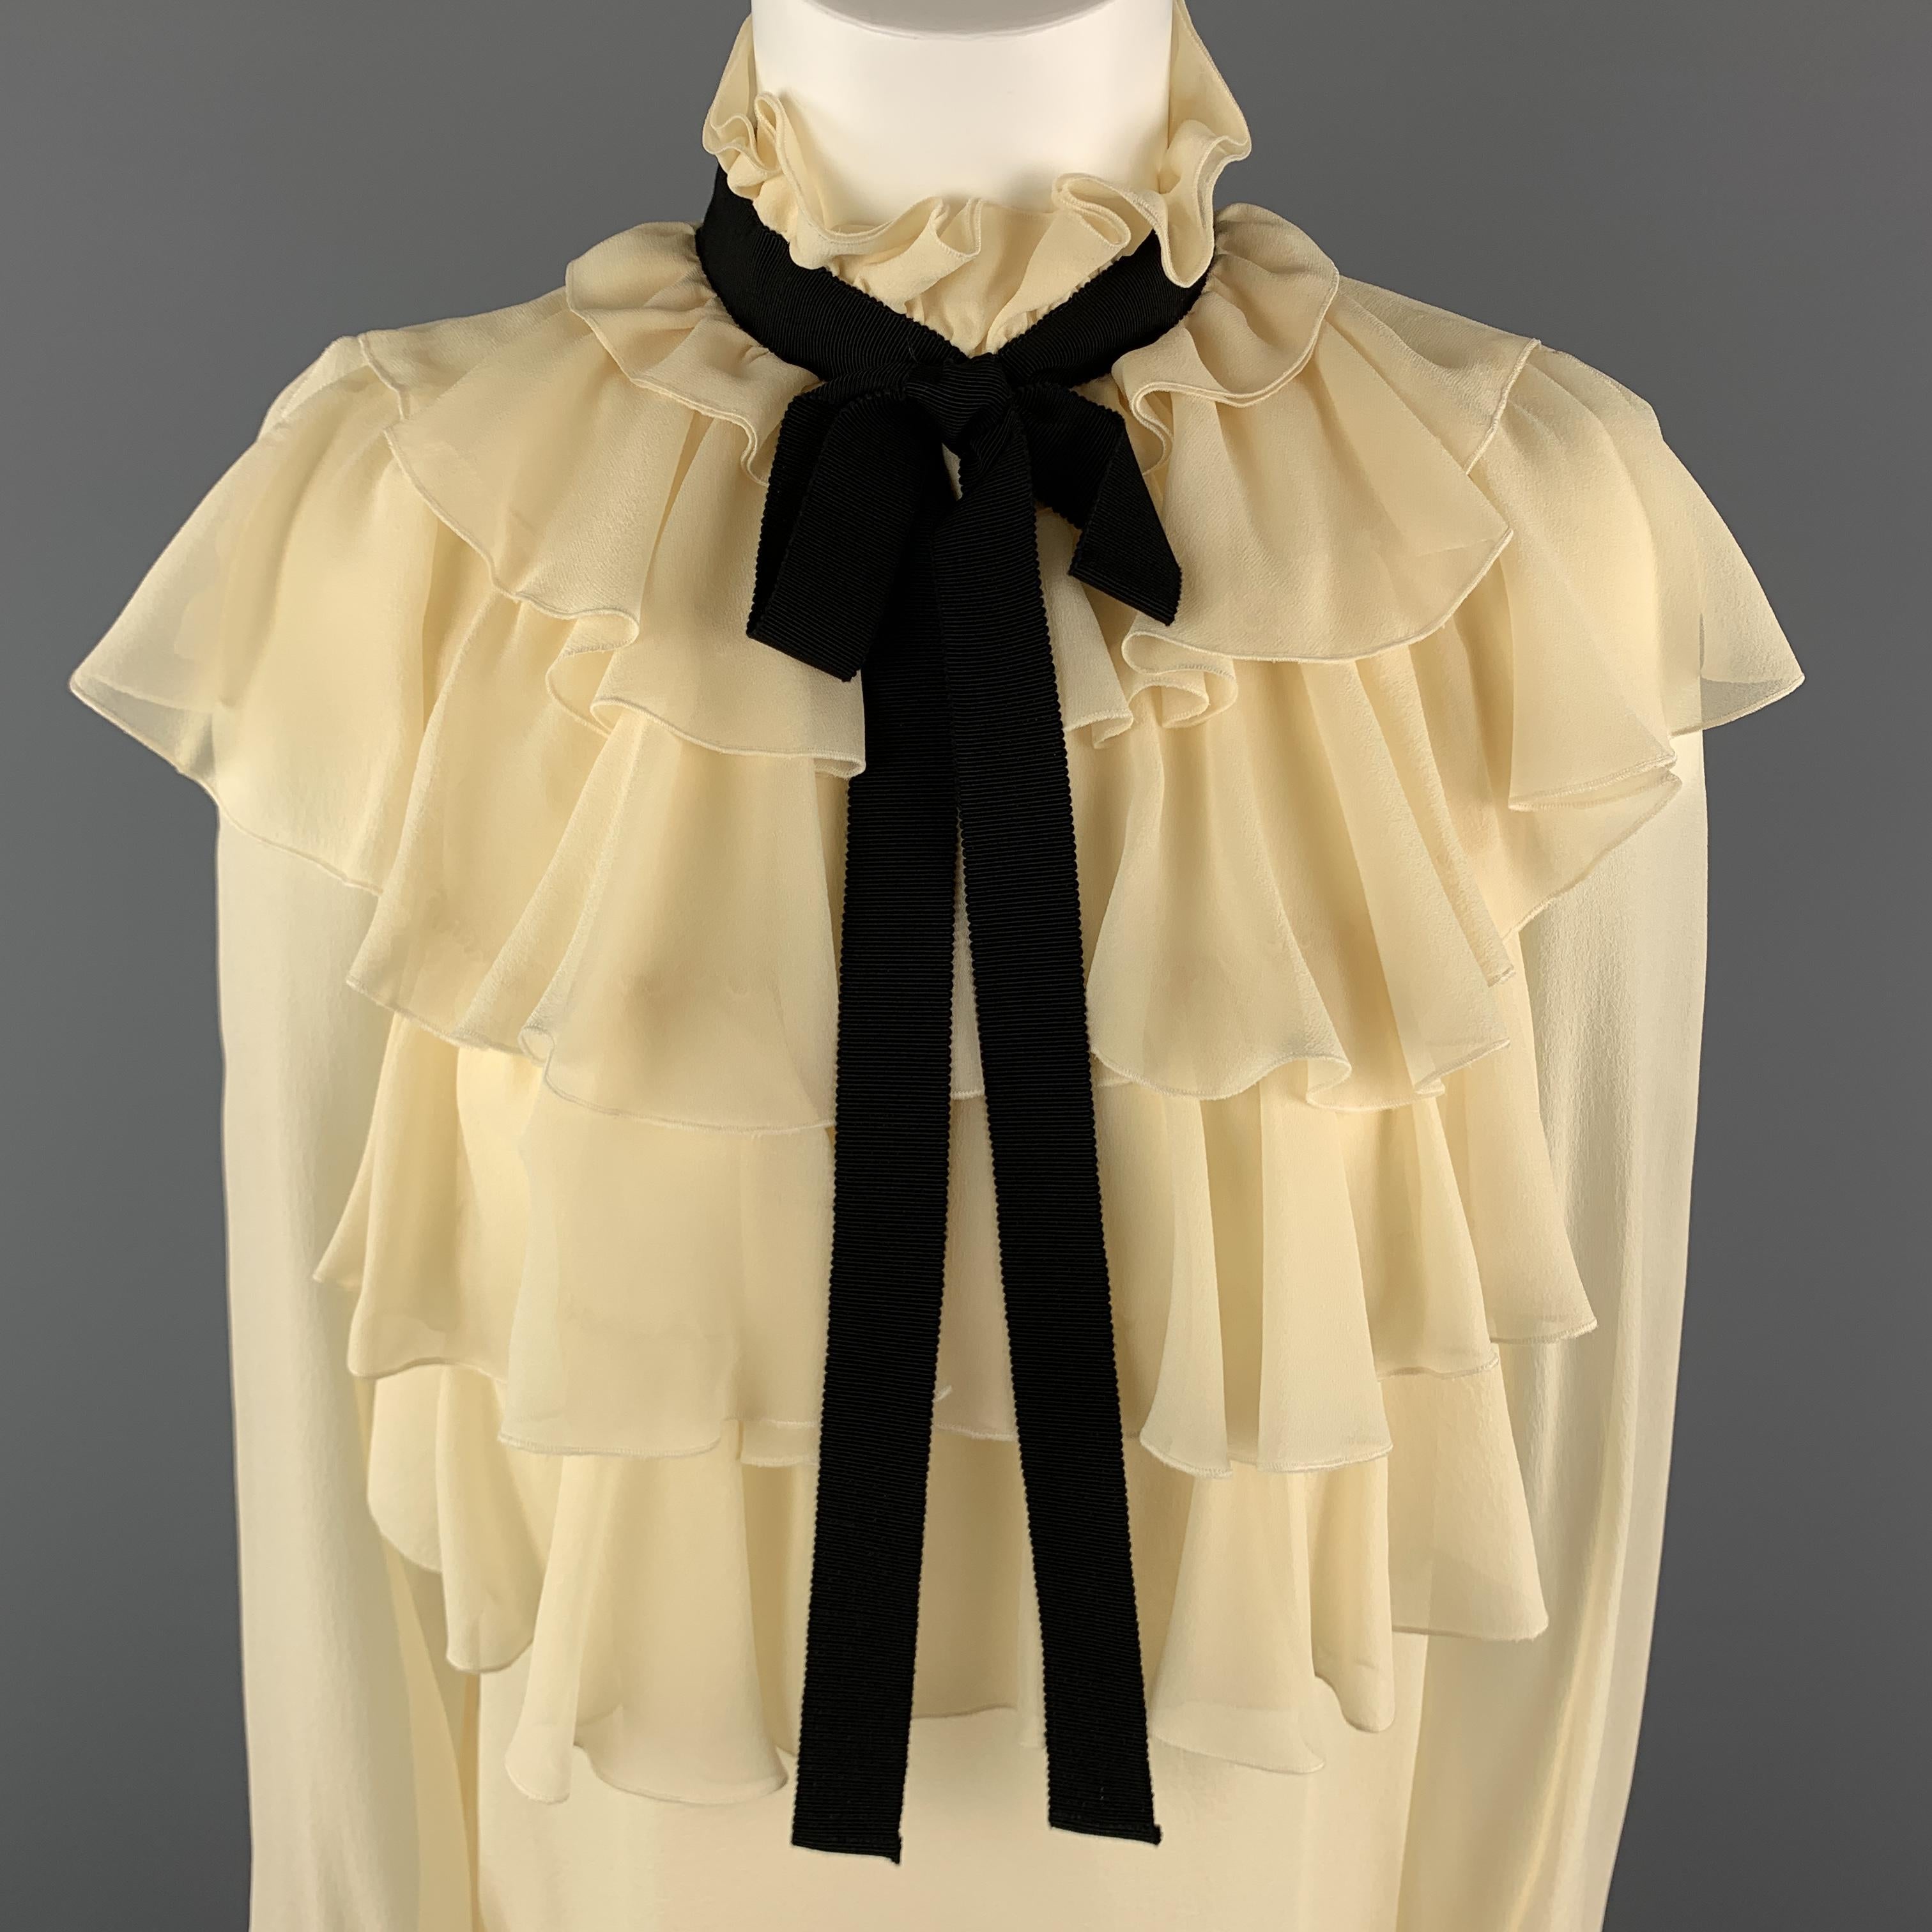 GUCCI Blouse comes in a cream tone in a silk material, with a high collar, a ruffled front and cuffs, a black ribbon, raglan long sleeves, and buttoned cuffs. Made in Italy.

Excellent Pre-Owned Condition.
Marked: IT 40

Measurements:

Shoulder: